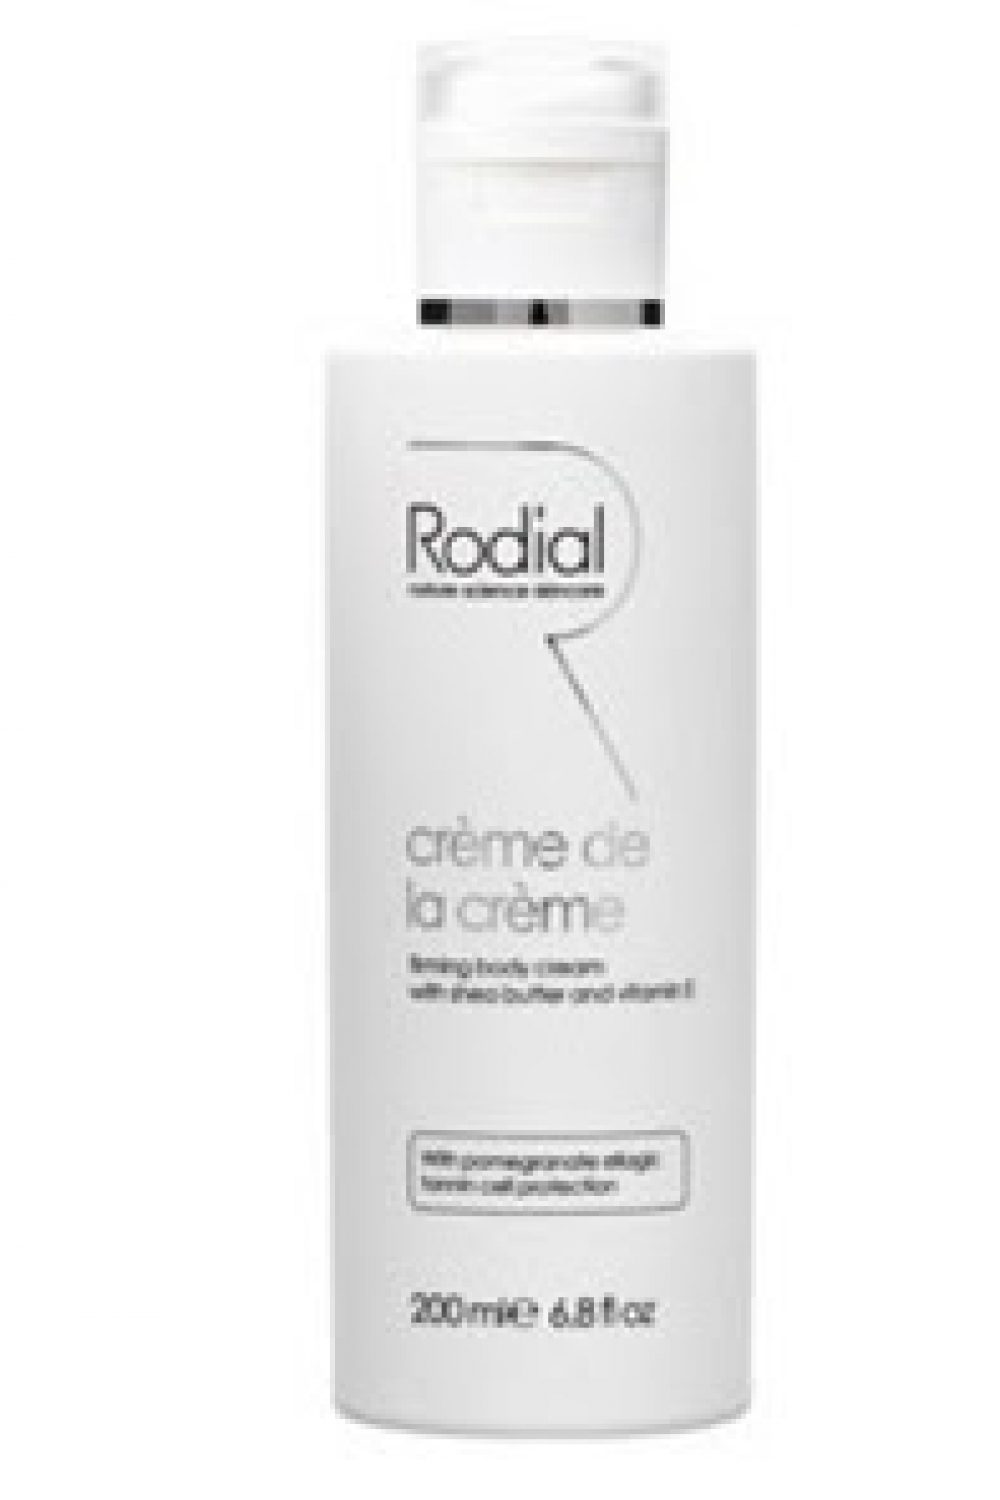 Shaping Up with Rodial